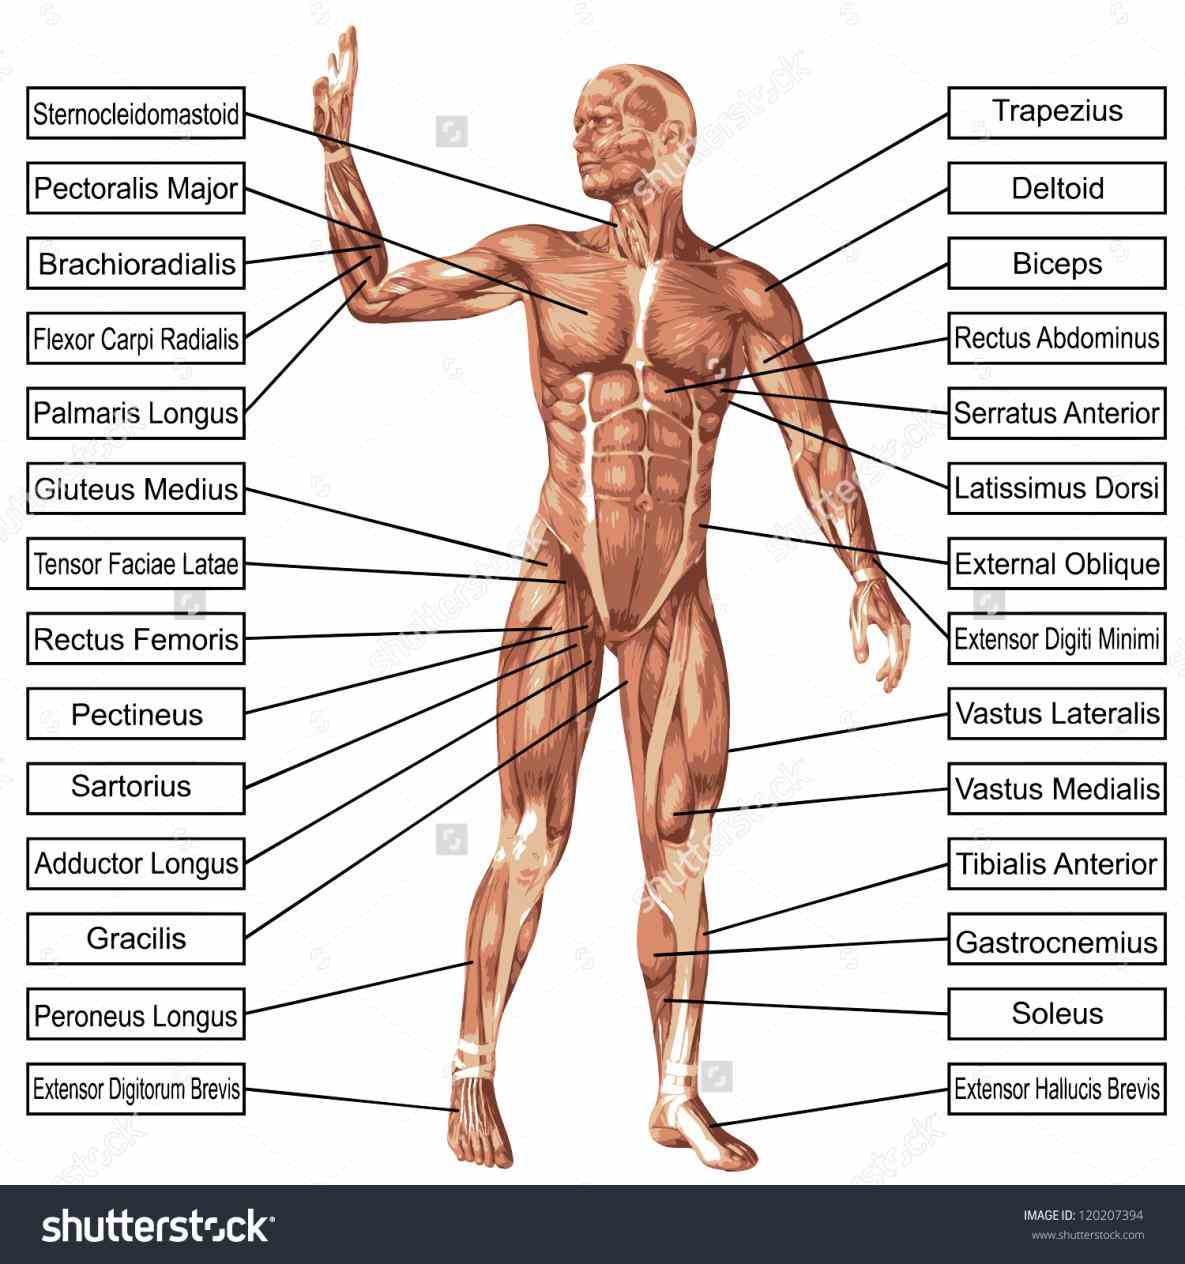 The Human Body video is for educational purposes only!!! we are looking at normans model muscles in muscles Muscle